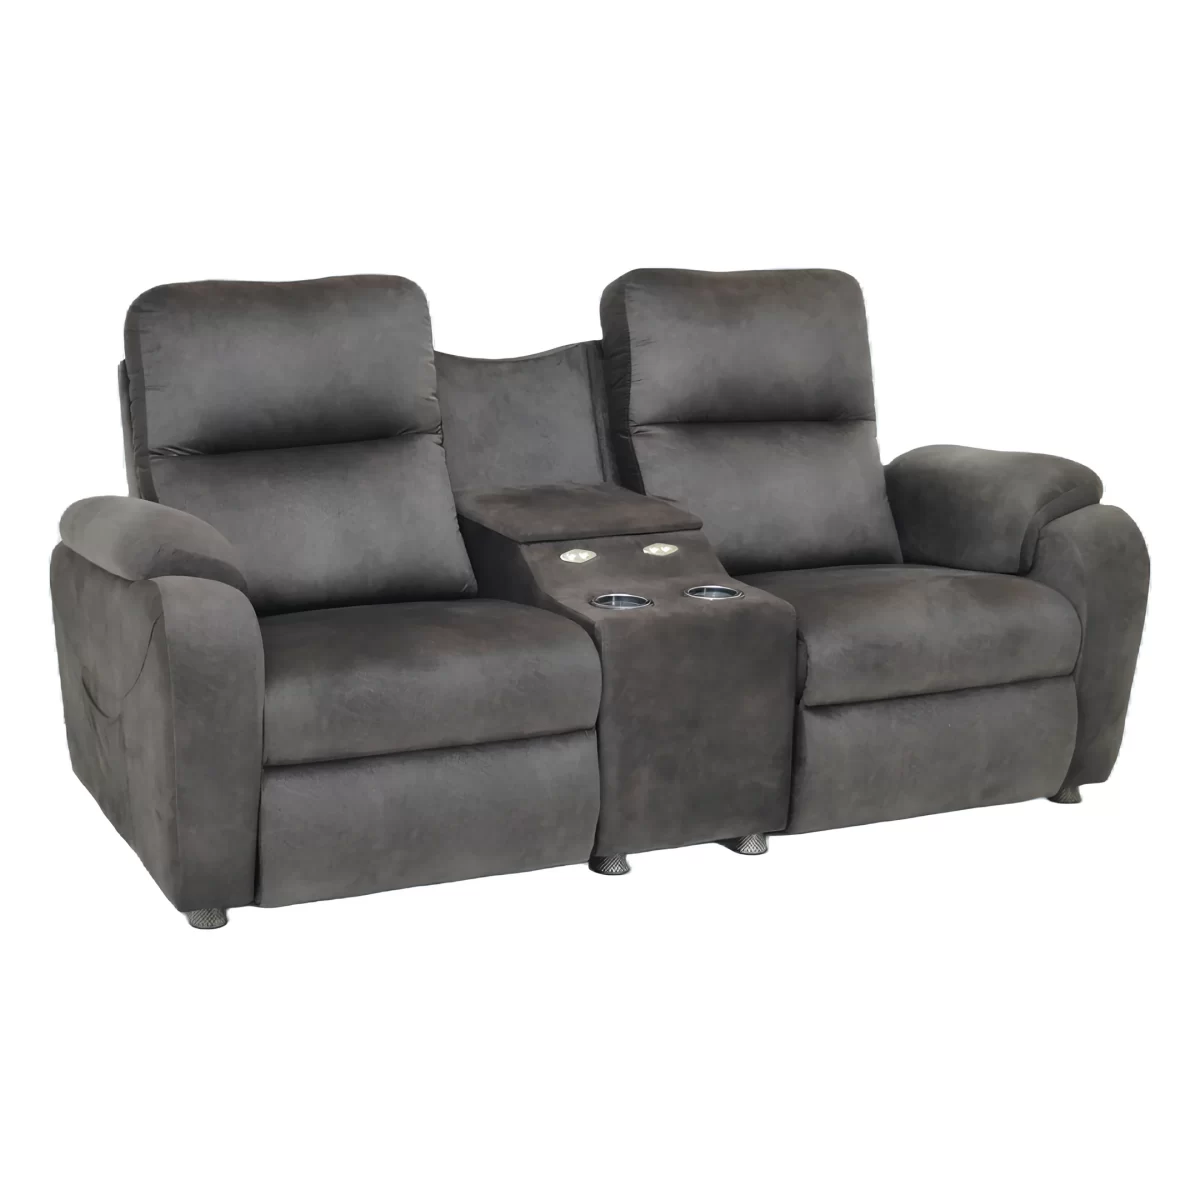 alis double recliner sofa electric reclining seat usb port cupholder 7